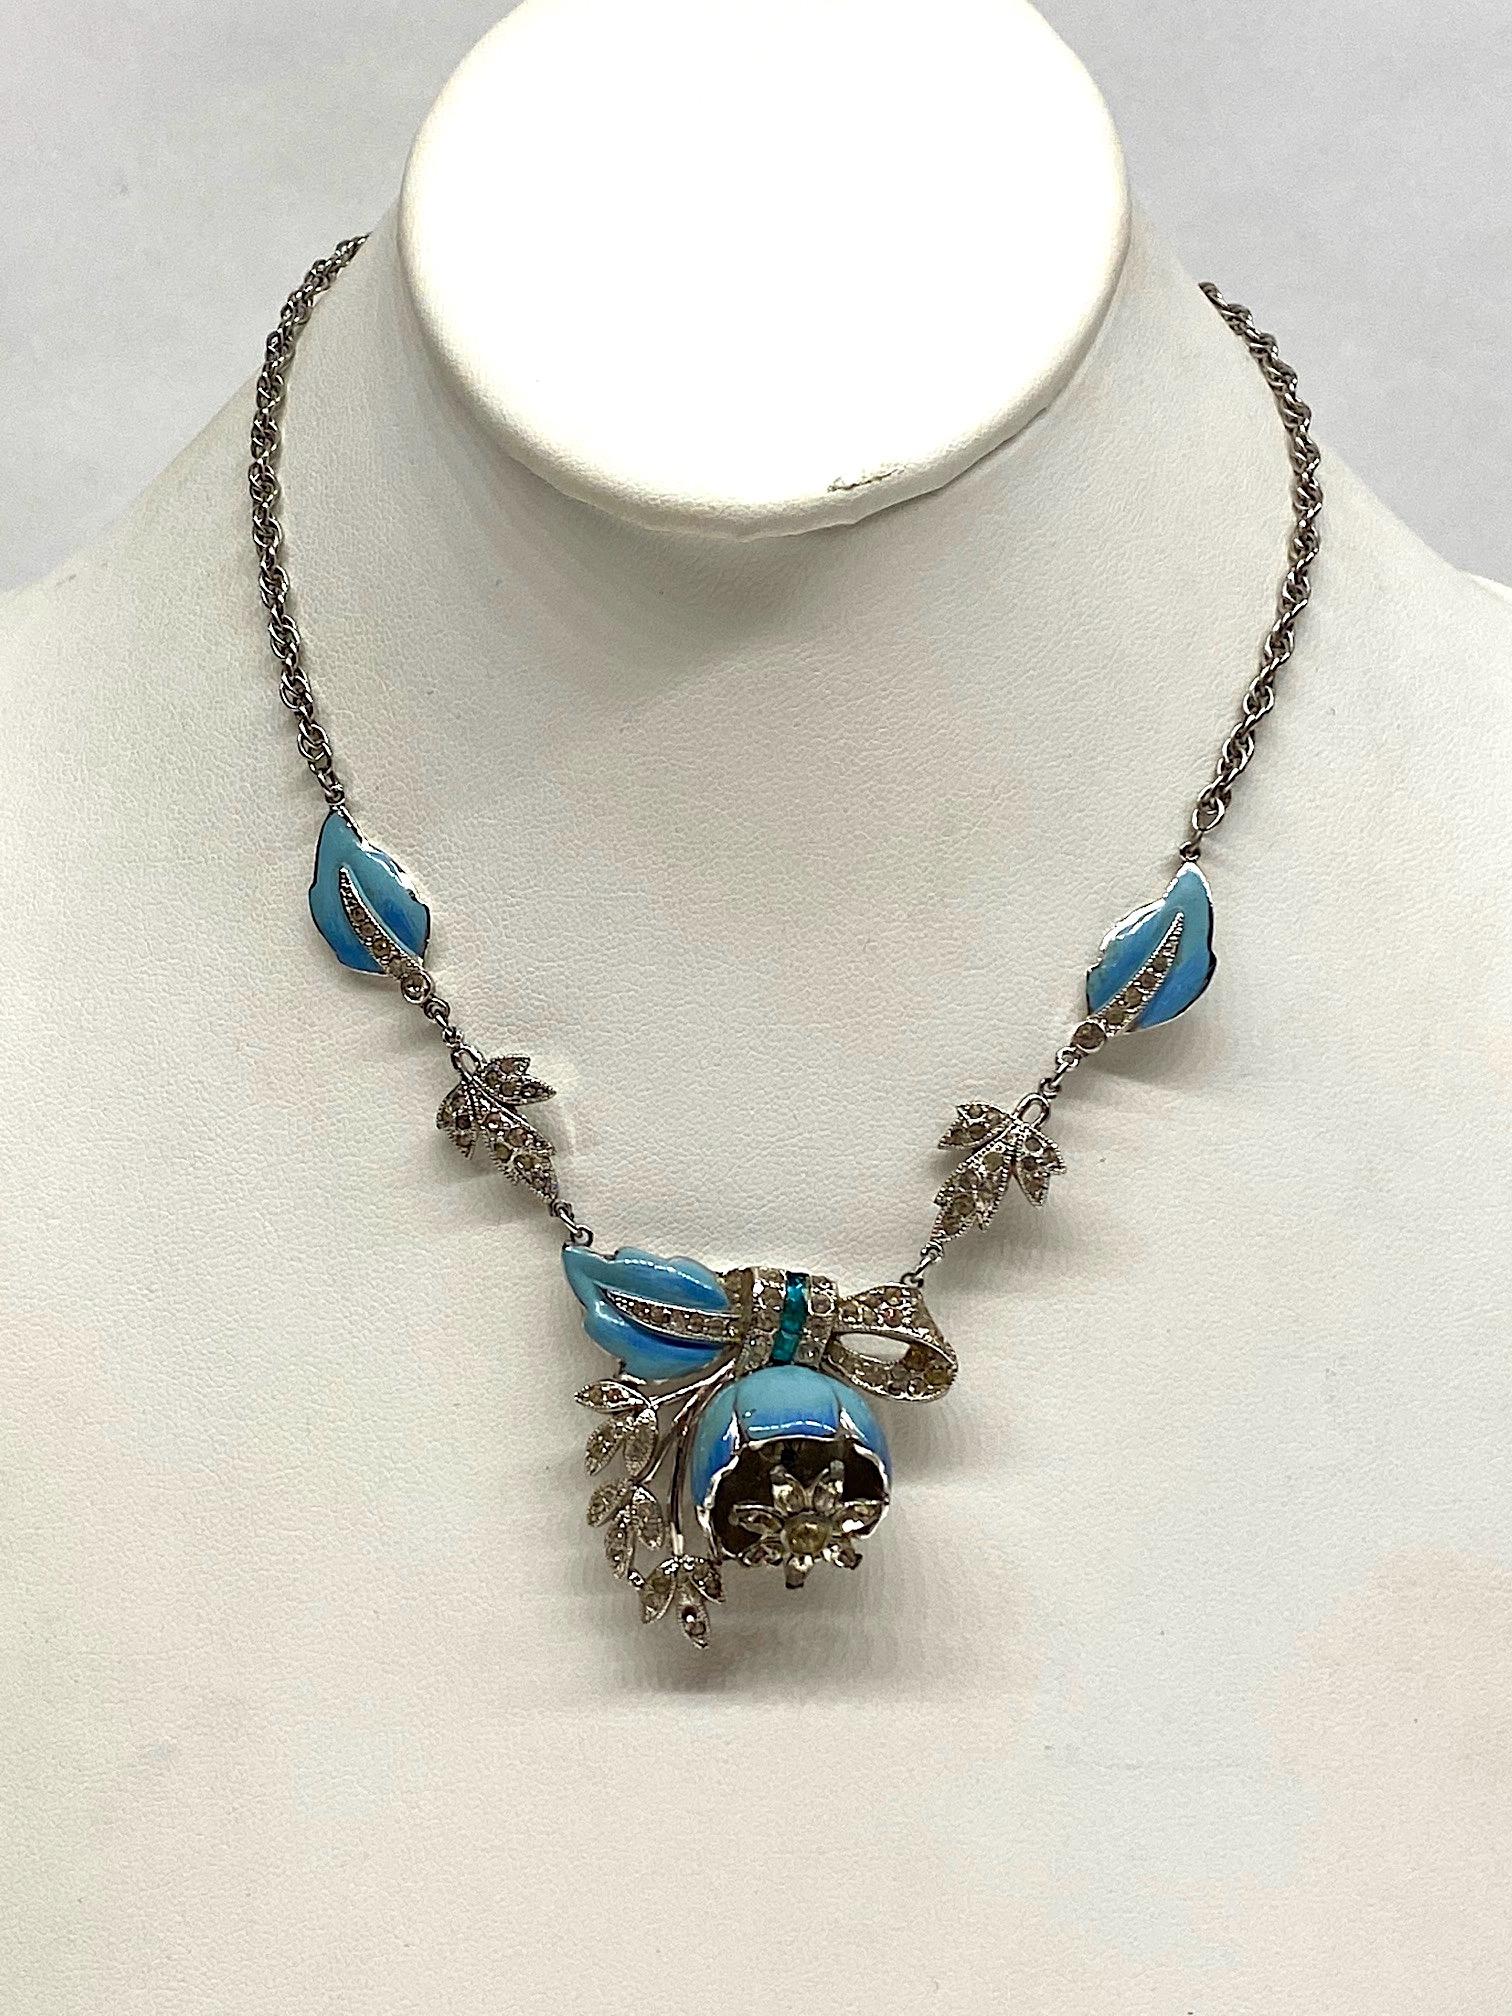 A lovely and rare unsigned Art Deco Coro quivering camellia necklace from 1939 by Adolph Katz. The central part of the necklace features a camellia flower with rhinestone flower on a spring that moves or trembles when worn. The outer part of the